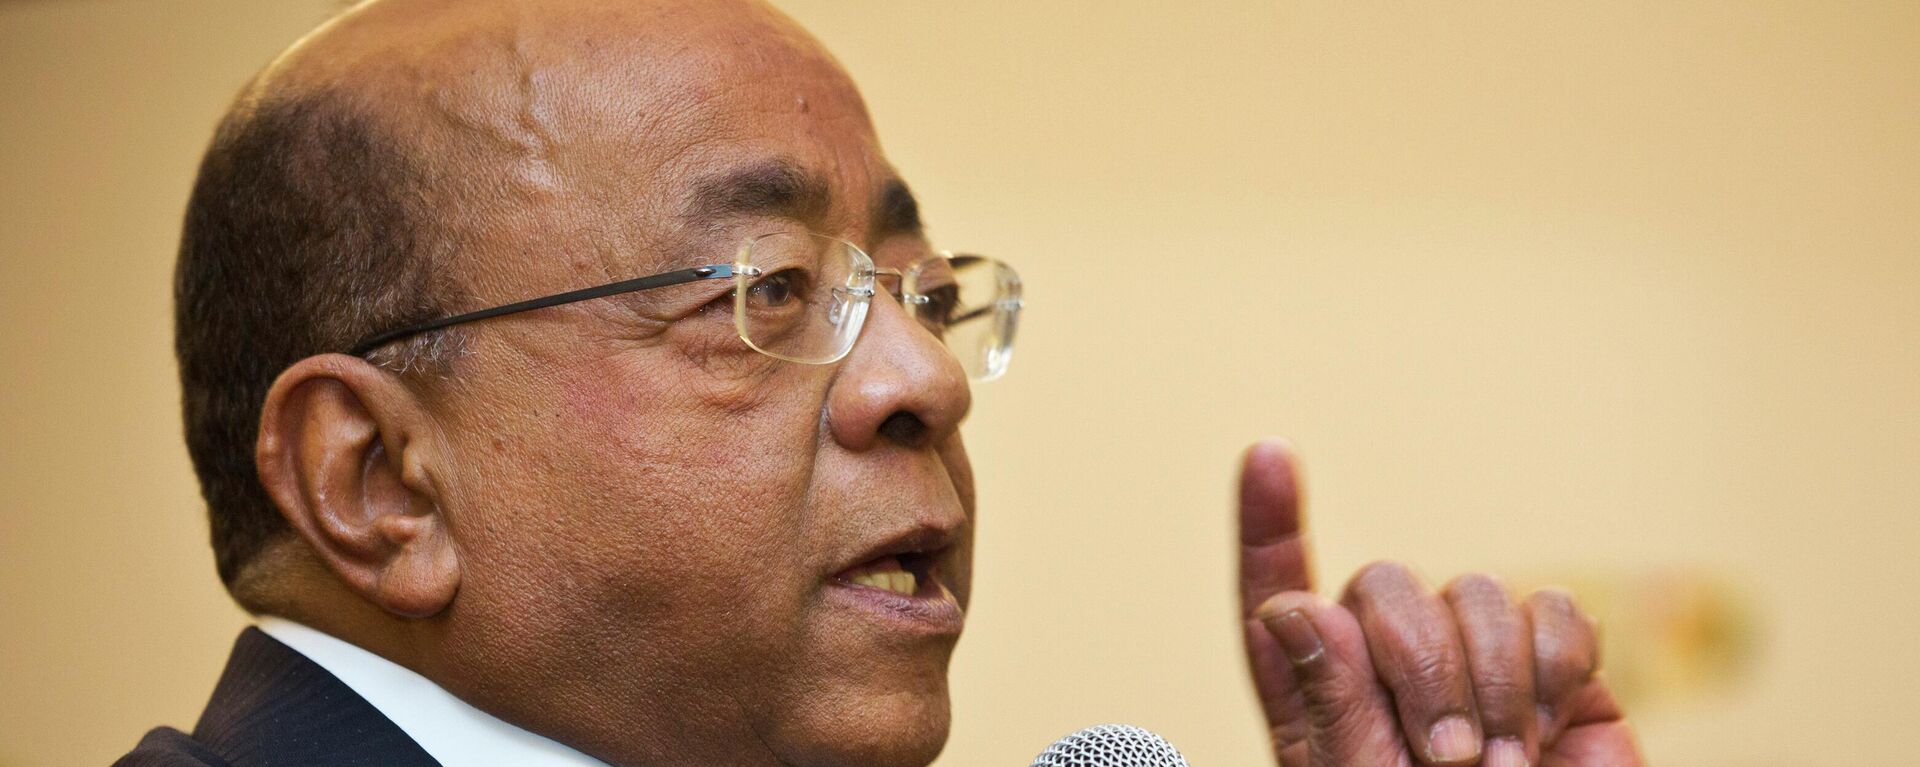 Mo Ibrahim, Chairman and Founder of the Mo Ibrahim Foundation, answers a question from a journalist at a news conference in Nairobi, Kenya, March 2, 2015. - Sputnik International, 1920, 04.10.2022